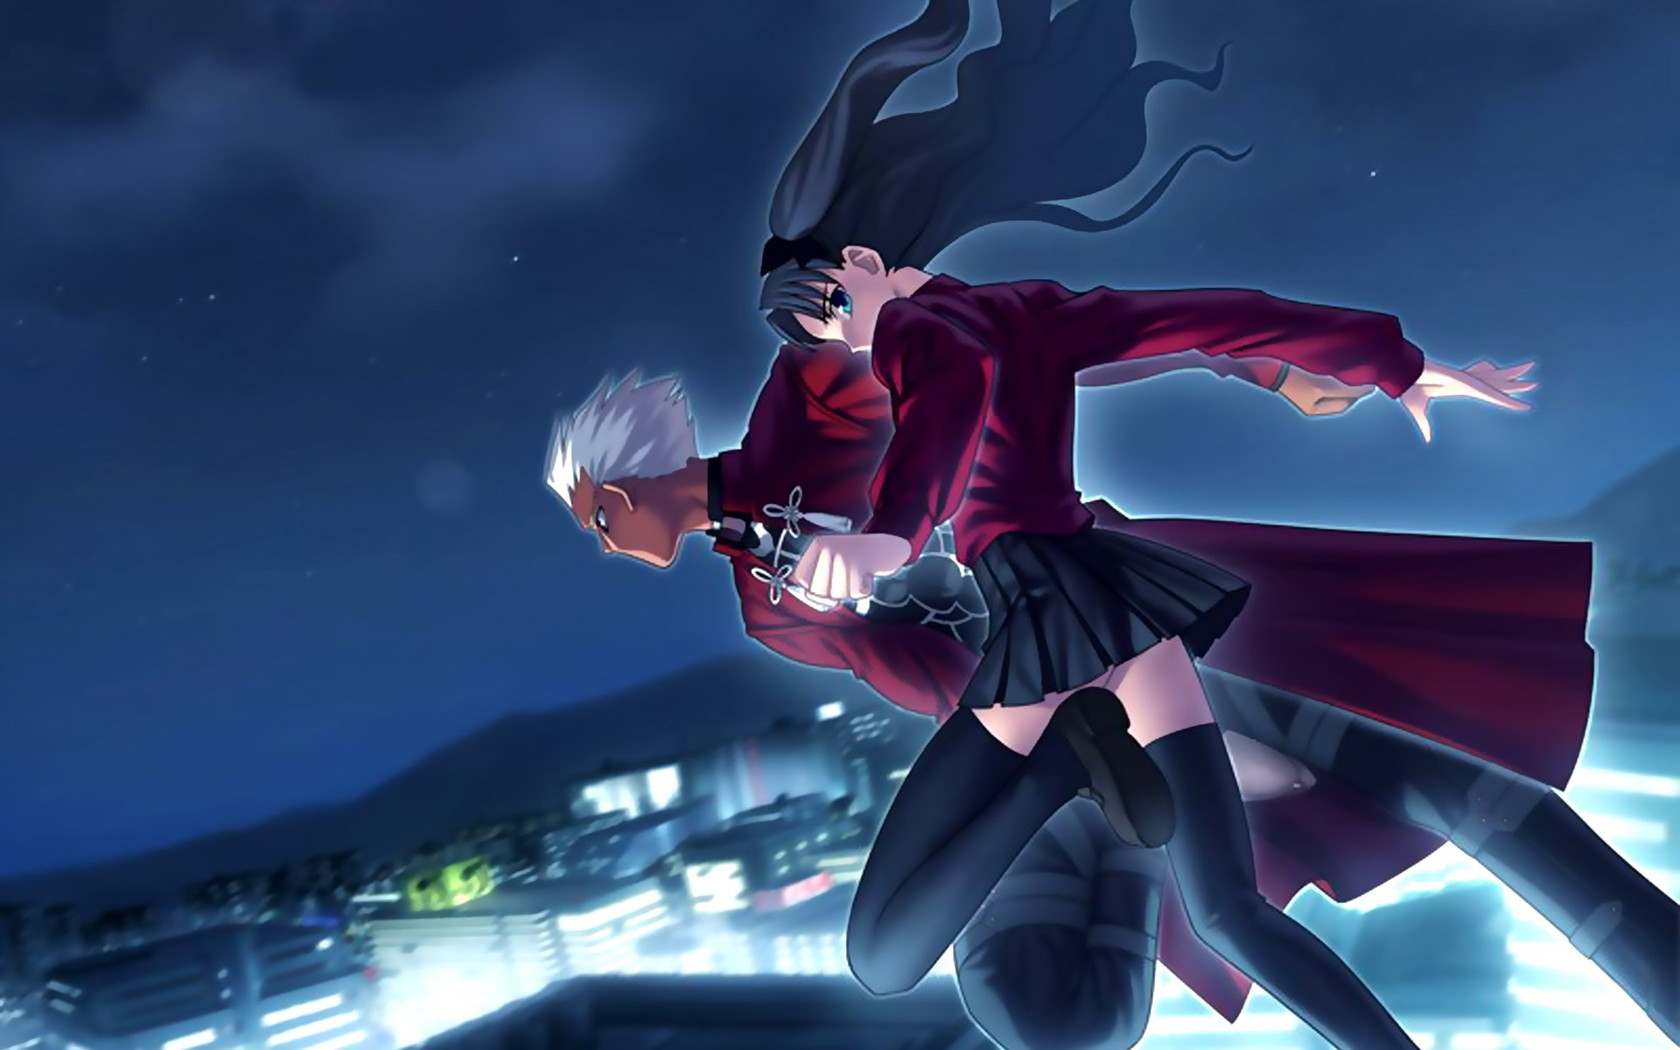 Download Archer and Rin Tohsaka   Fate Stay Night wallpaper